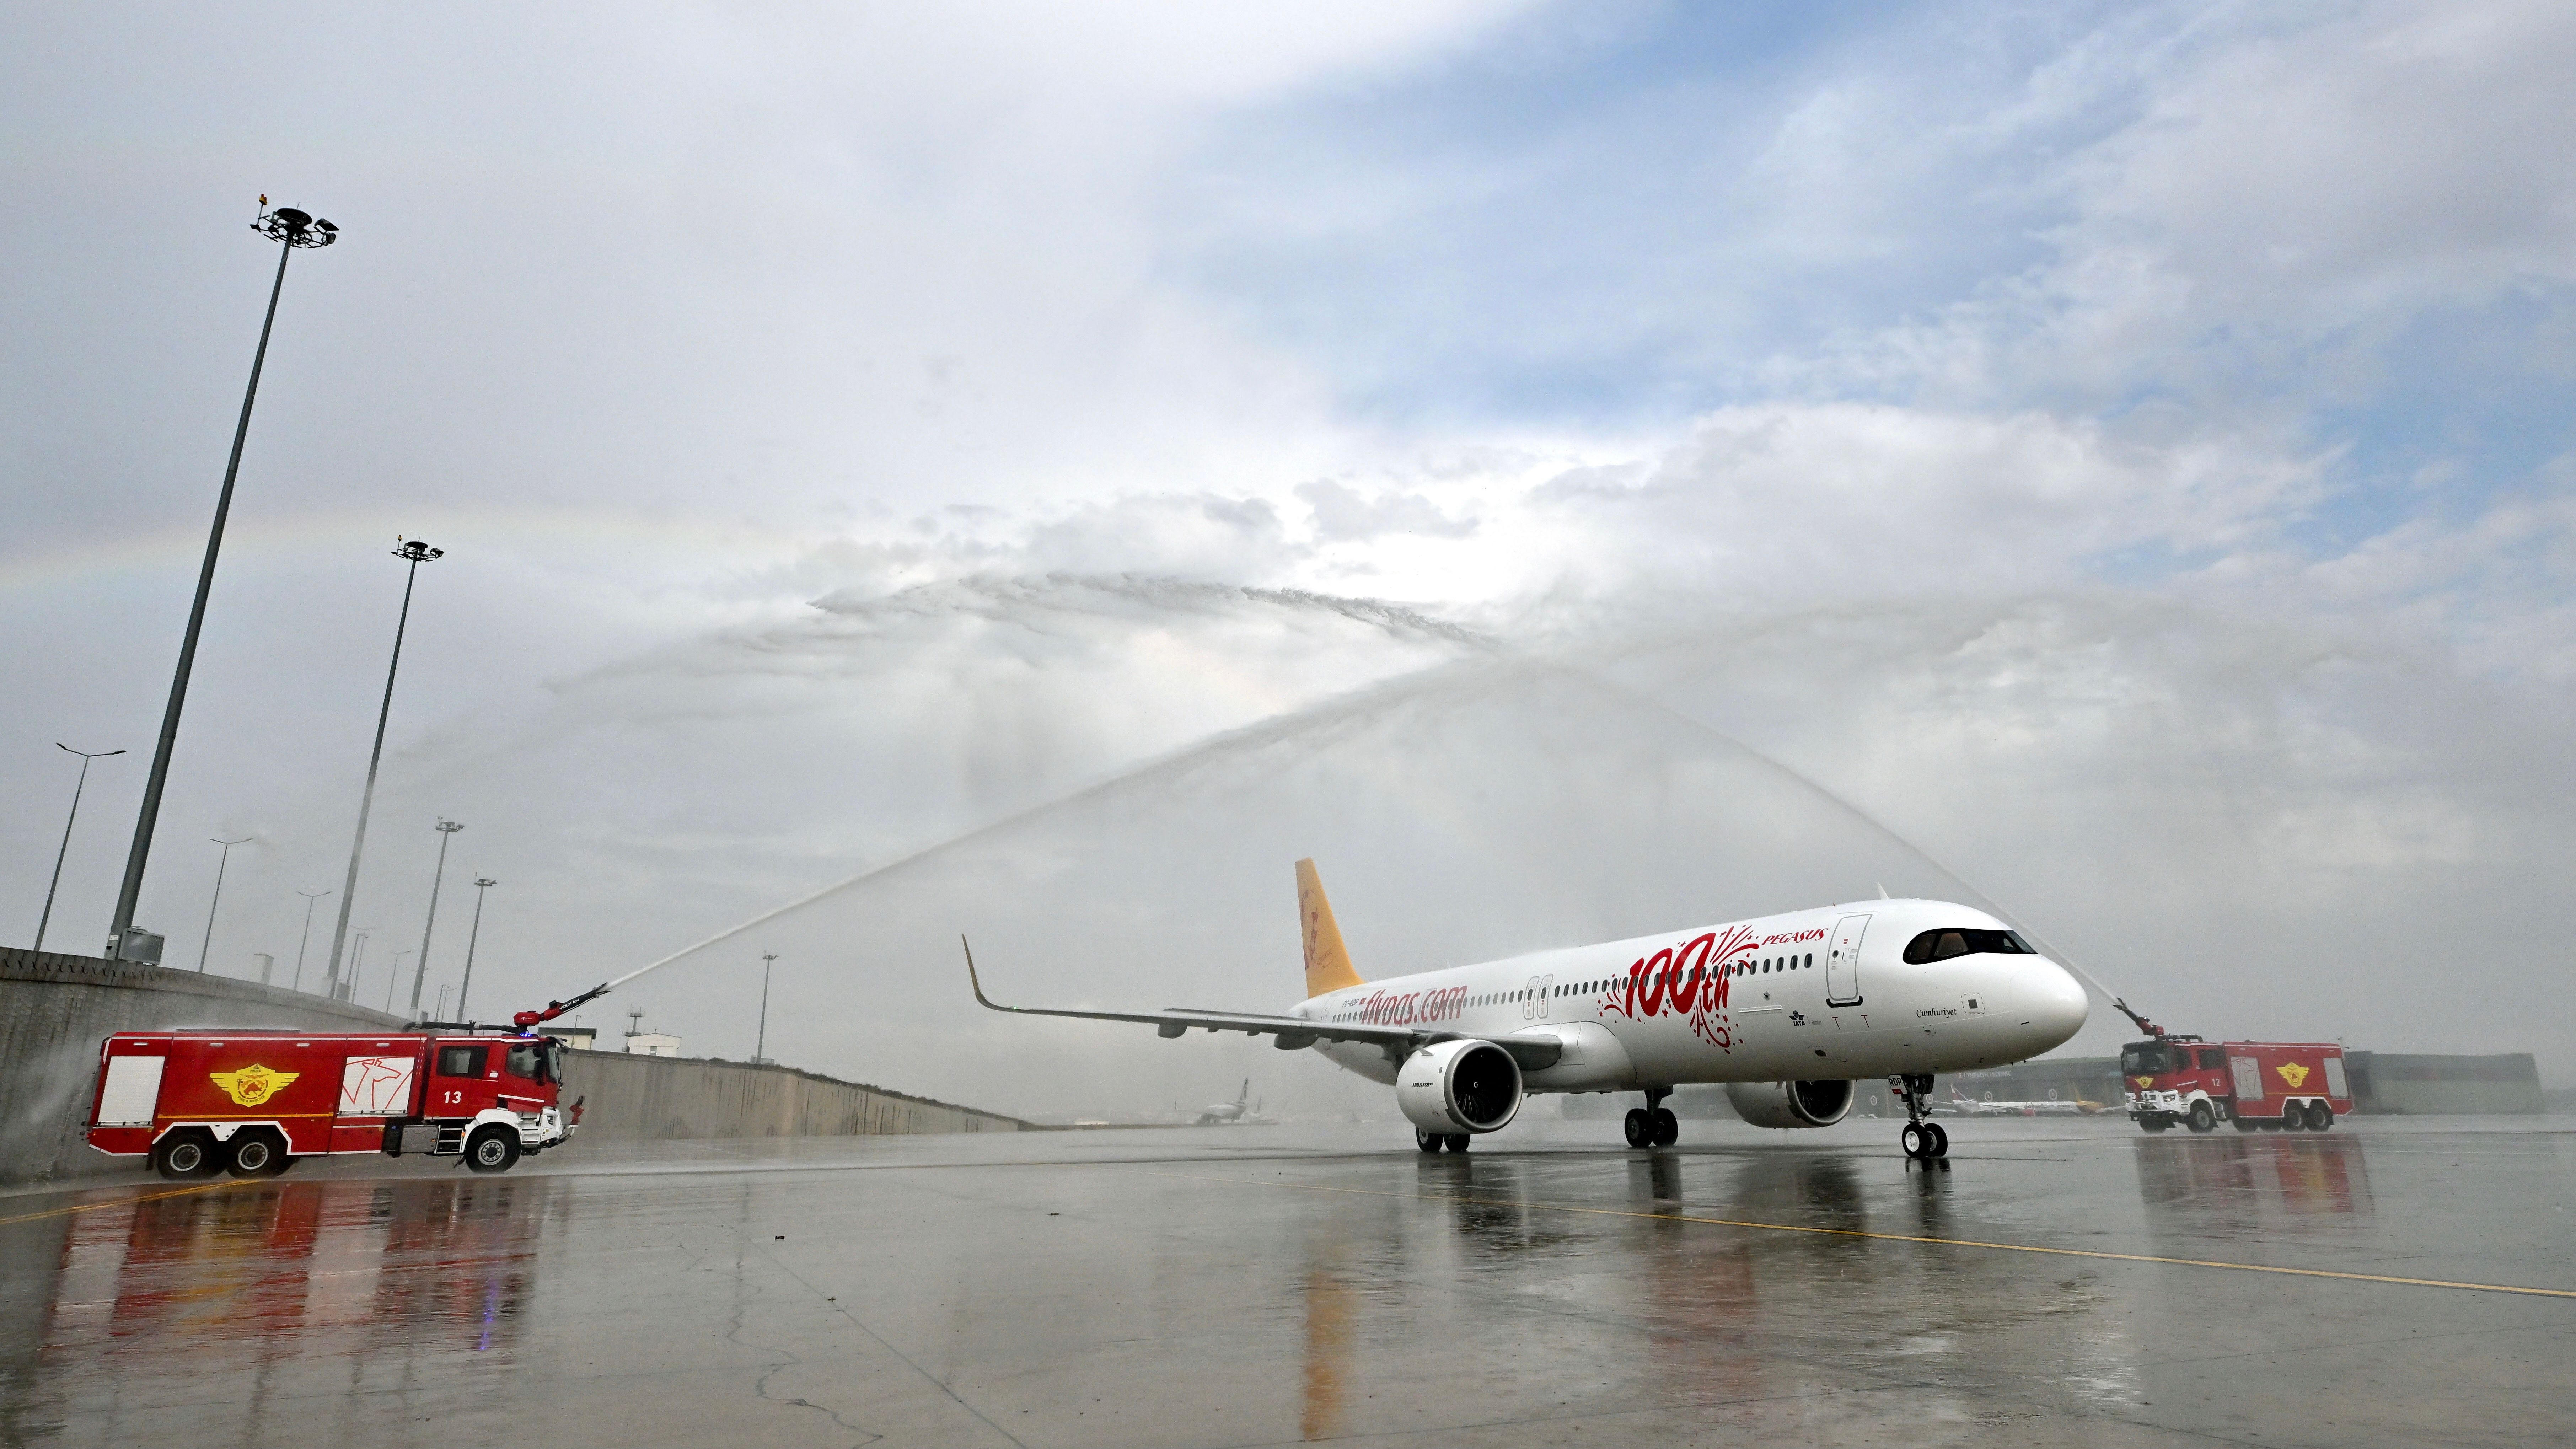 100th Aircraft: Pegasus Takes Delivery Of New Airbus A321neo To Mark Turkish Republic’s Centenary